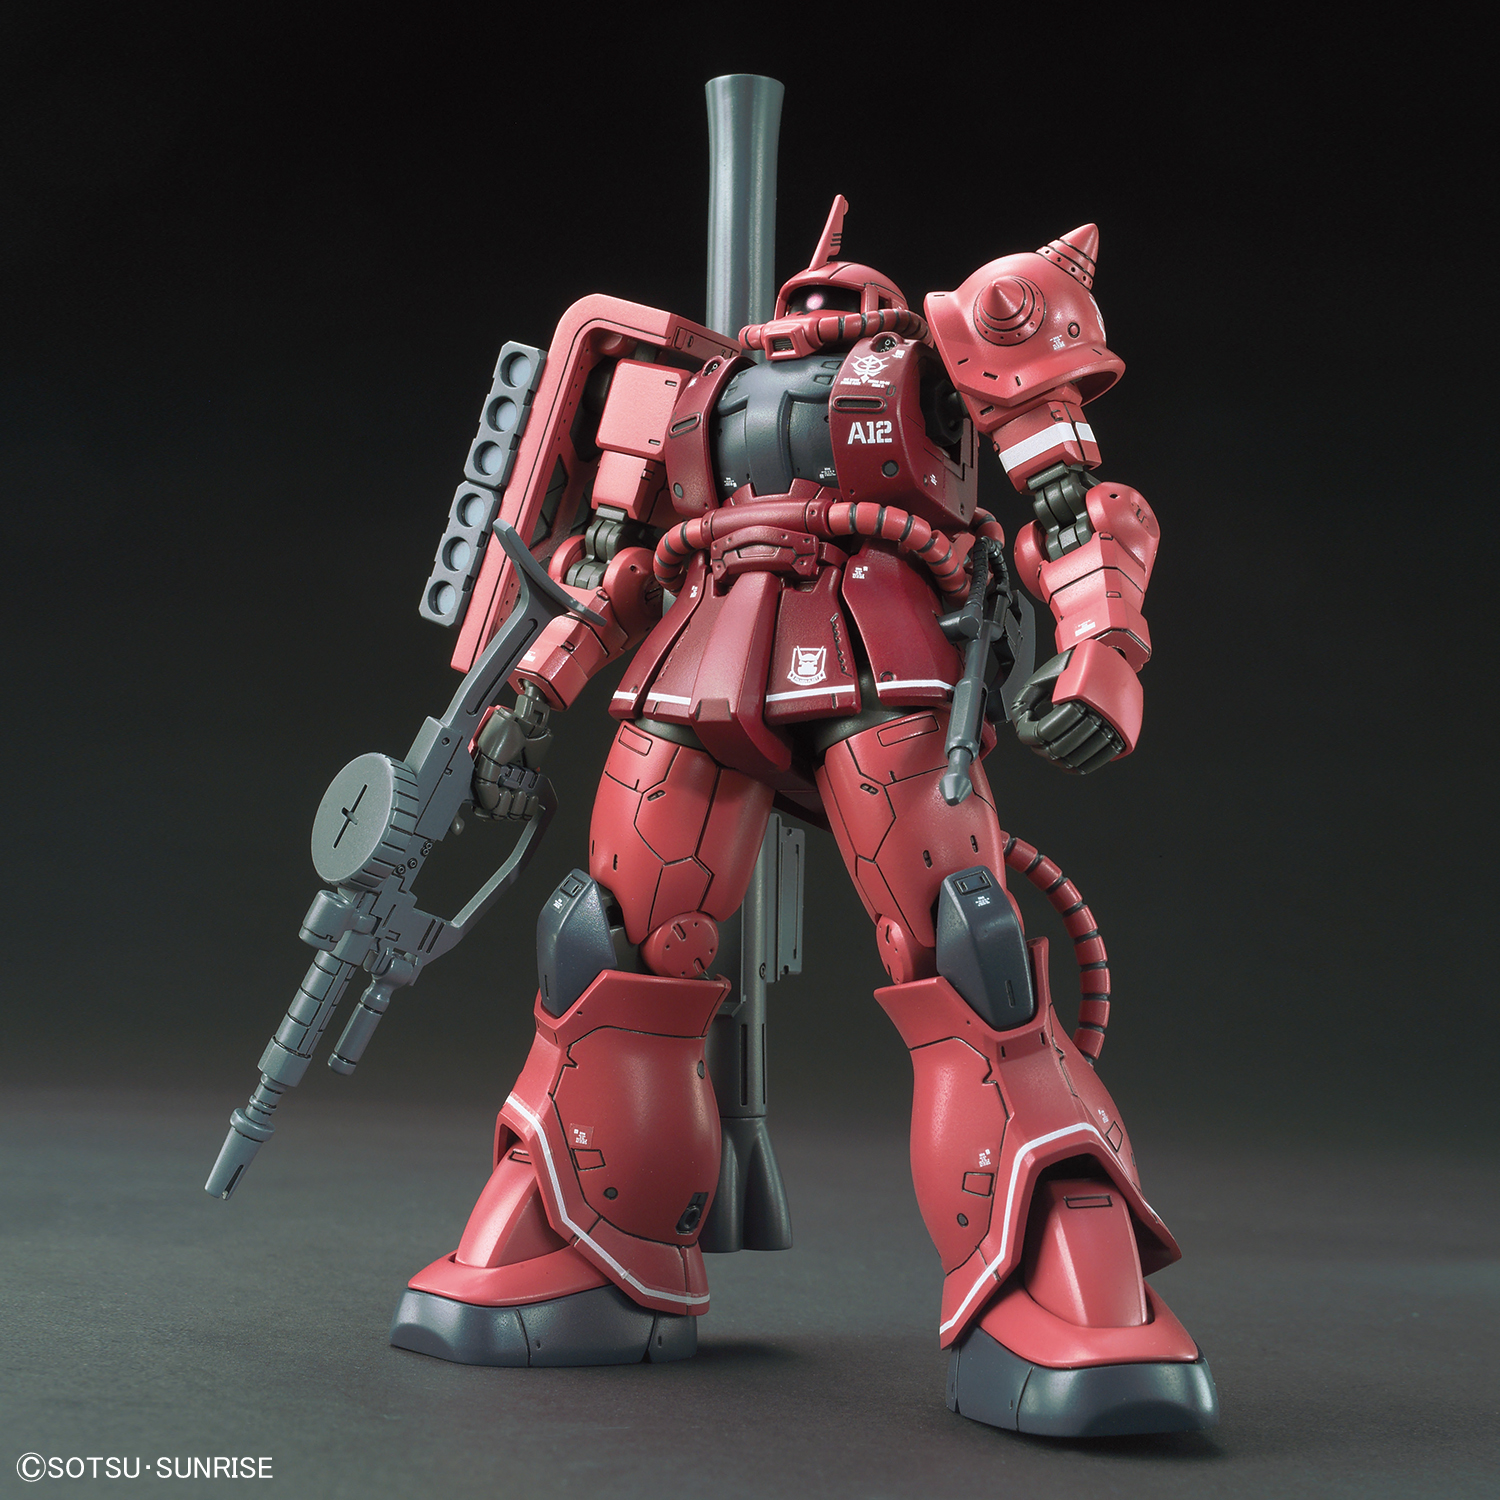 HG GUNDAM - 1/144 - MS-06S ZAKU II PRINCIPALITY OF ZEON CHAR AZNABLE’S MOBILE SUIT RED COMET VER. (REPEAT) **PRE-ORDER**